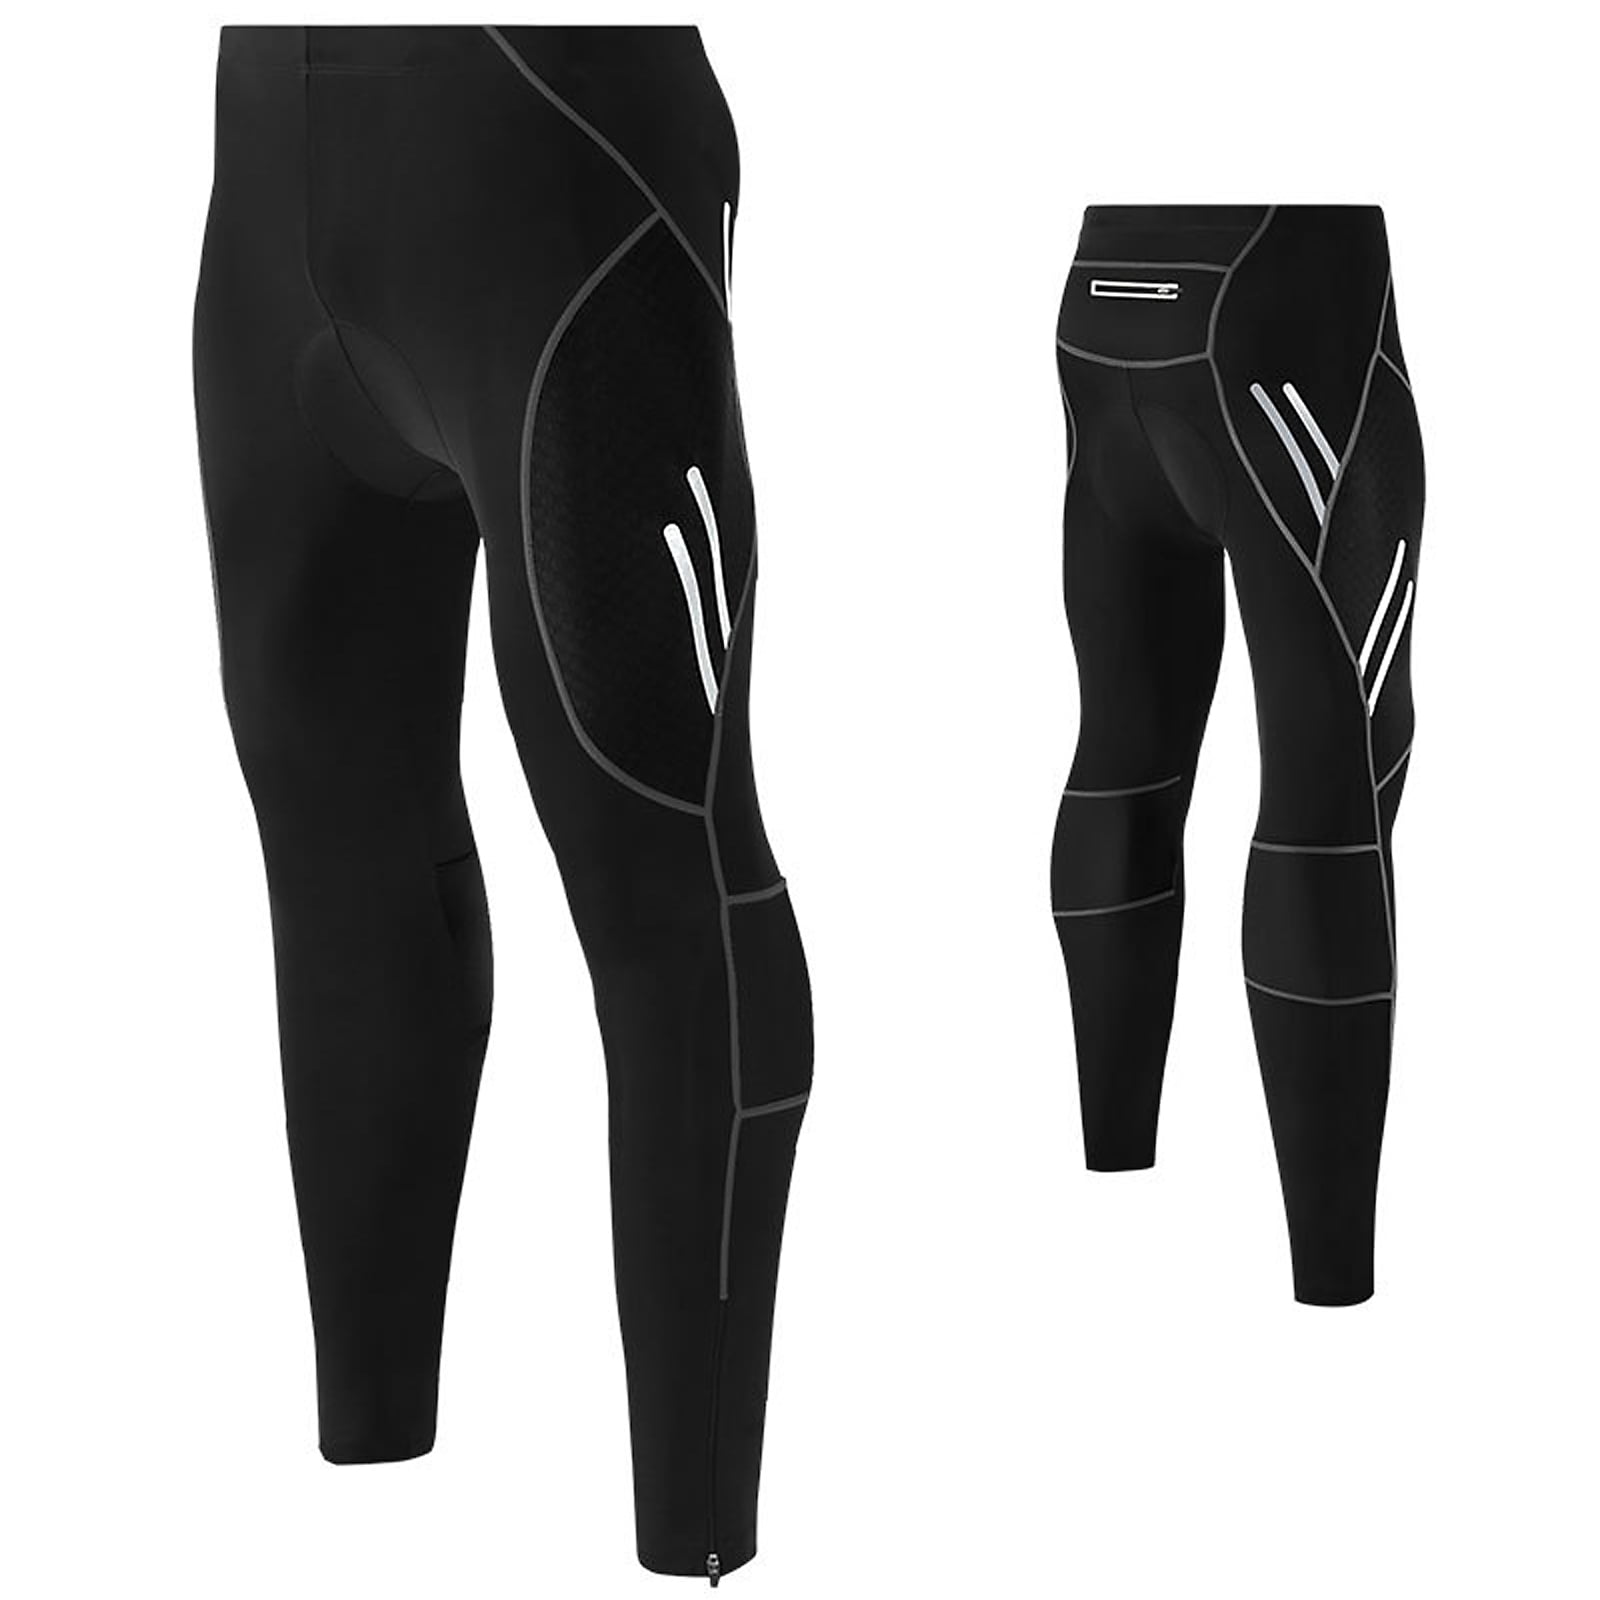 Santic Men's Cycling Bike Pants 4D Padded Long Bicycle Compression Tights Breathable Trousers 